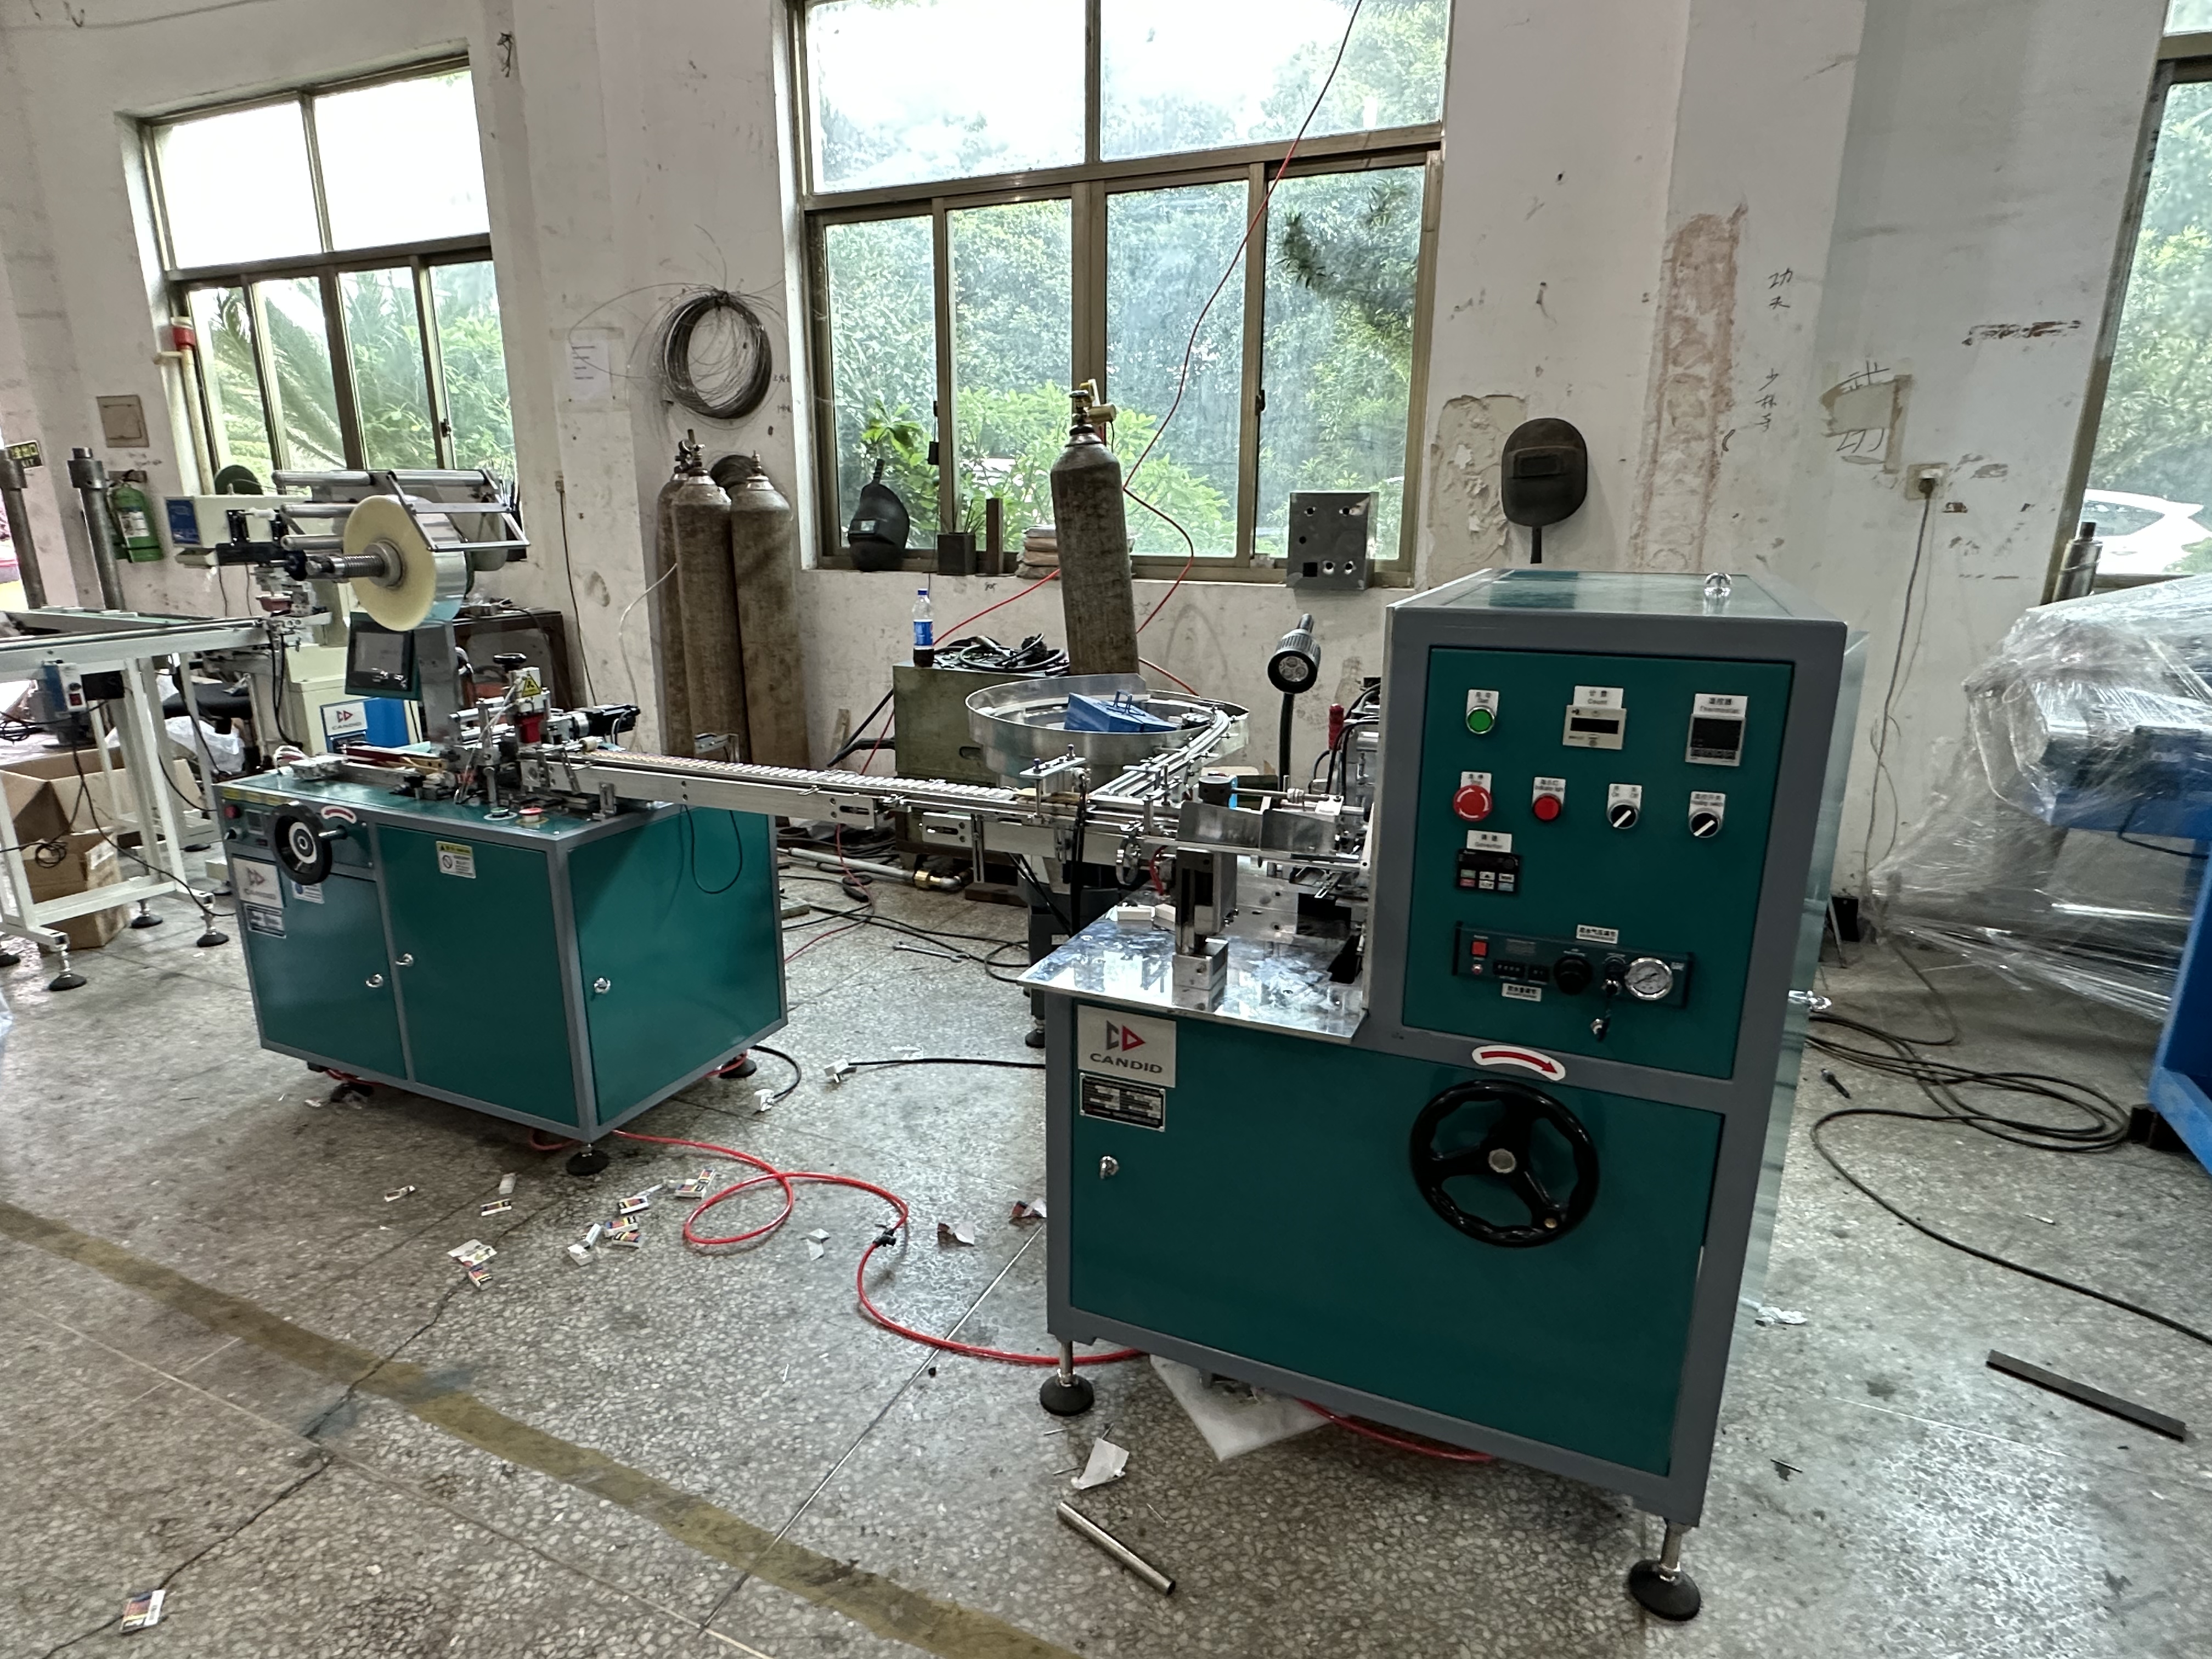 Single Color Full Automatic Packing PVC Eraser Making Machine